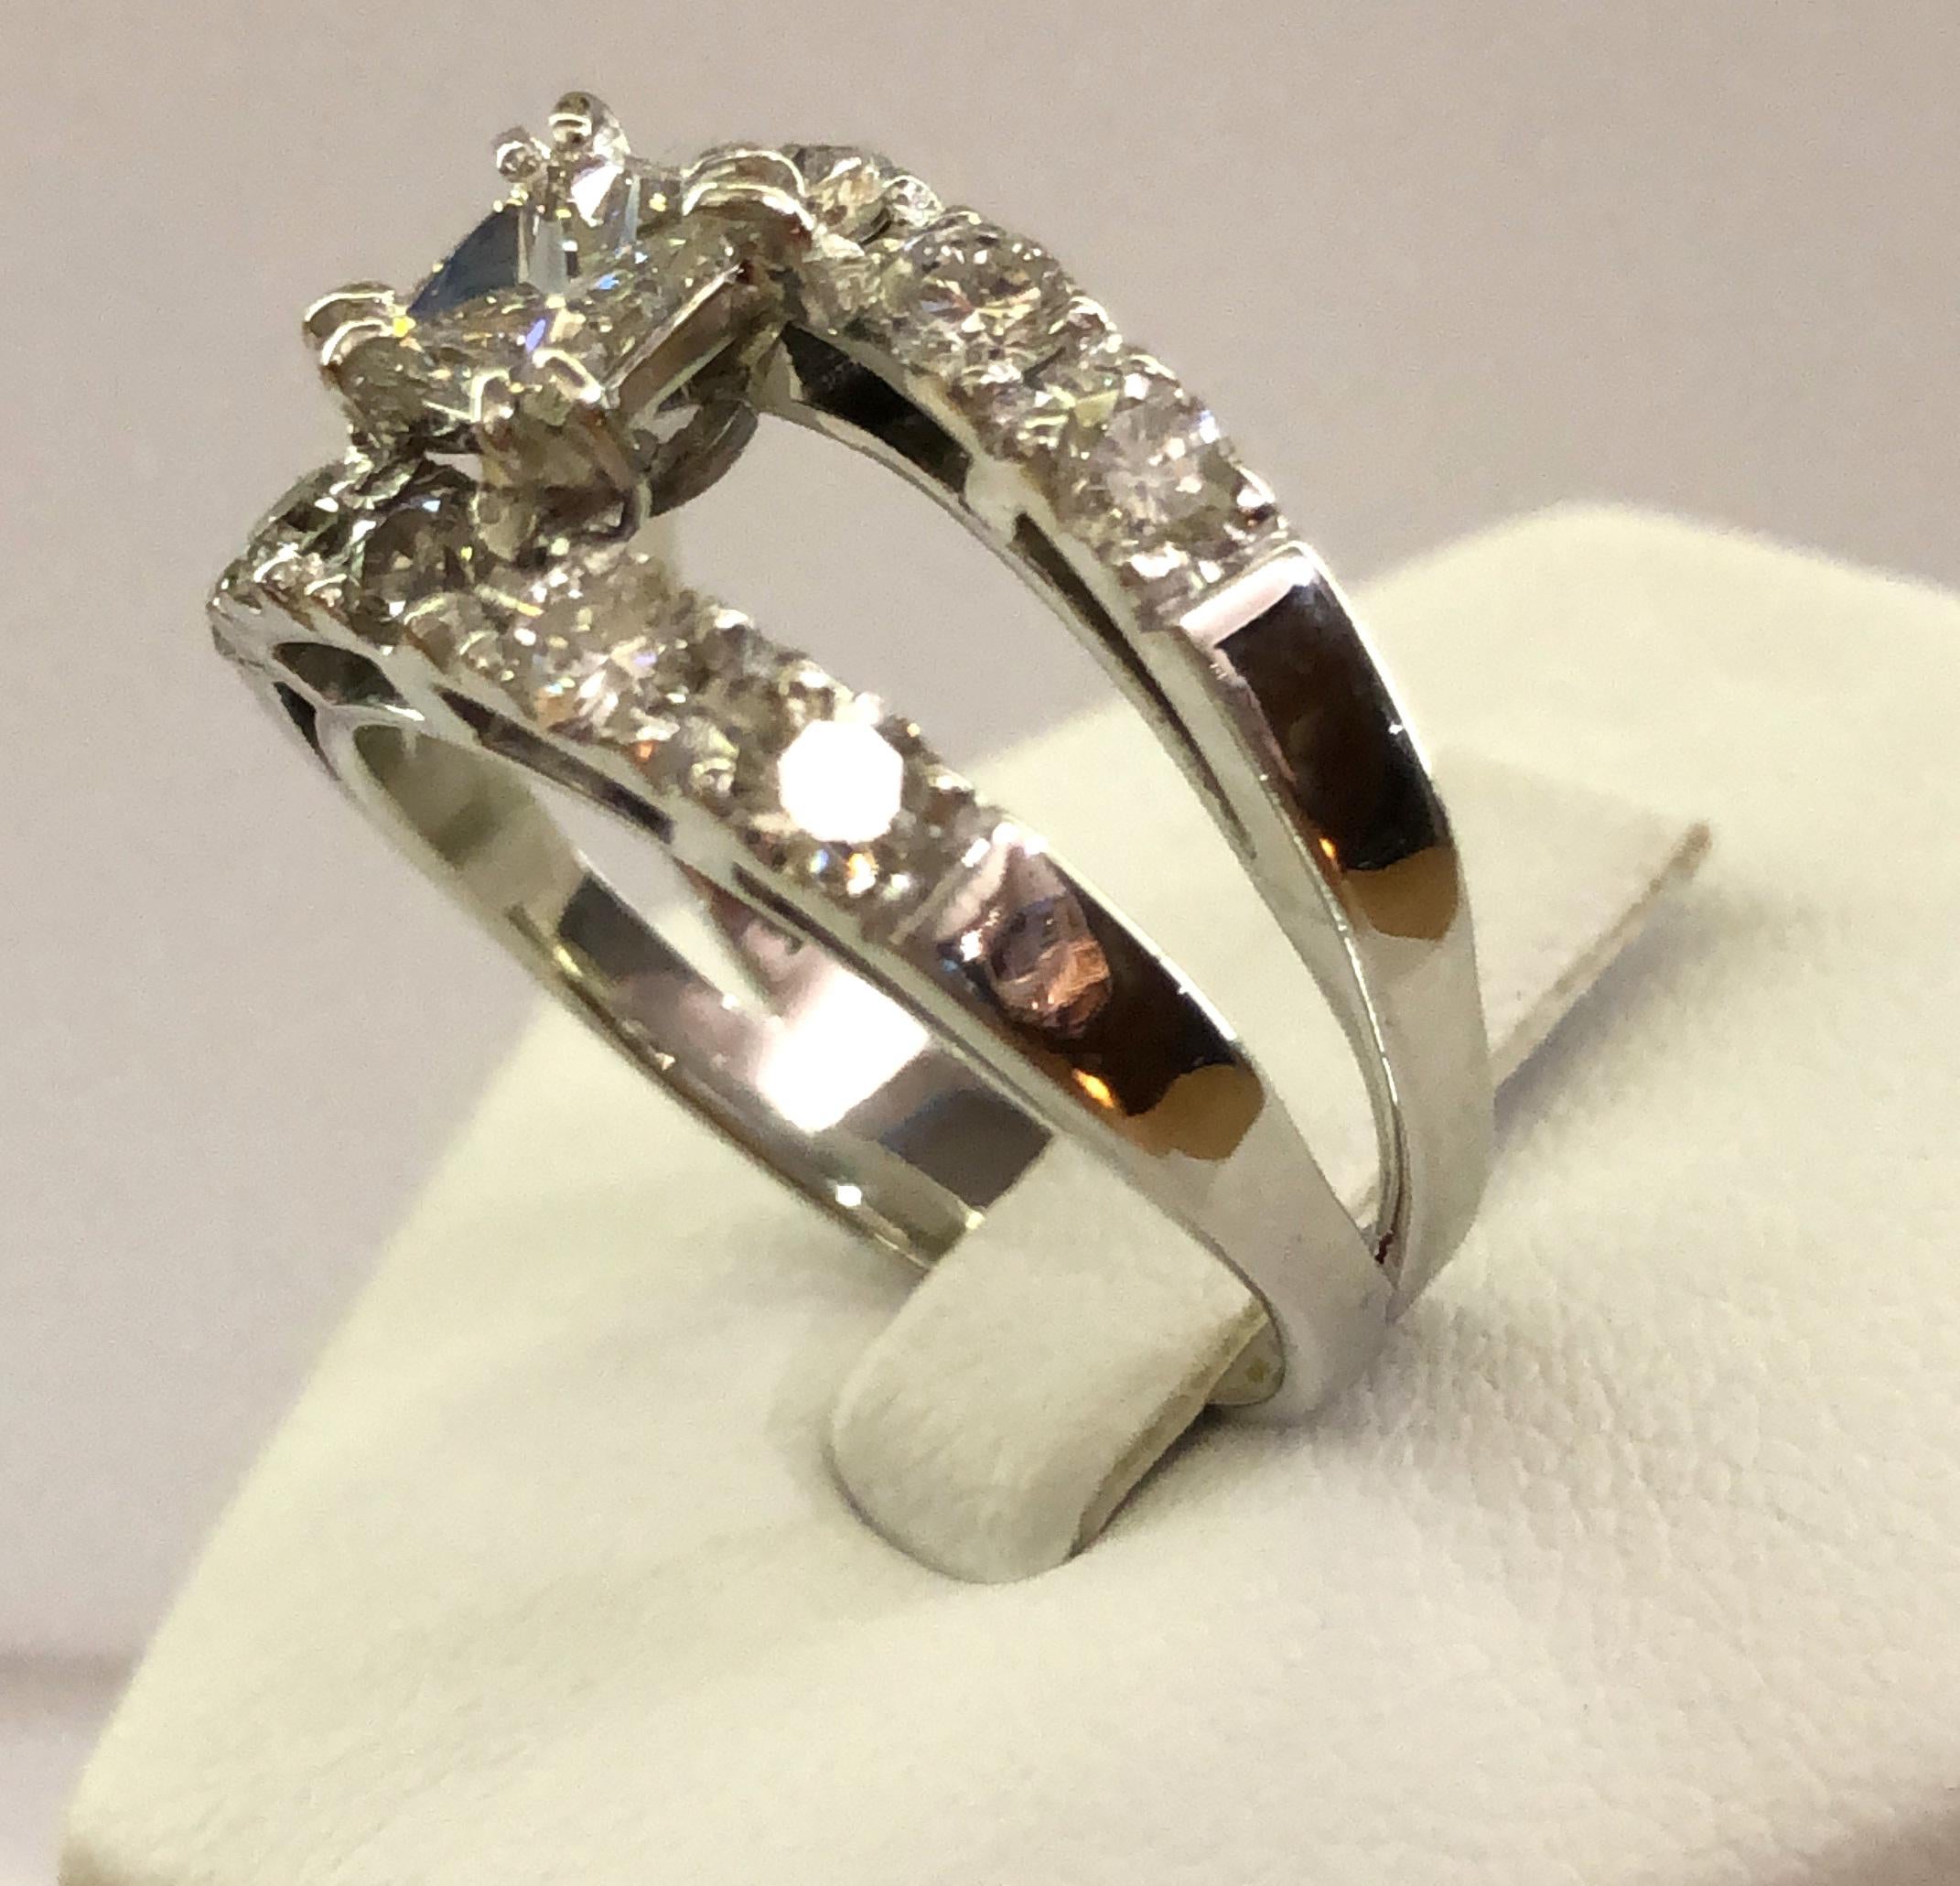 Vintage 18 karat white gold ring, with a central large brilliant diamond of 0.8 karats in princess cut, and double rows of additional diamonds for a total of 0.95 karats, Italy 1940-1950s
Ring size US 8